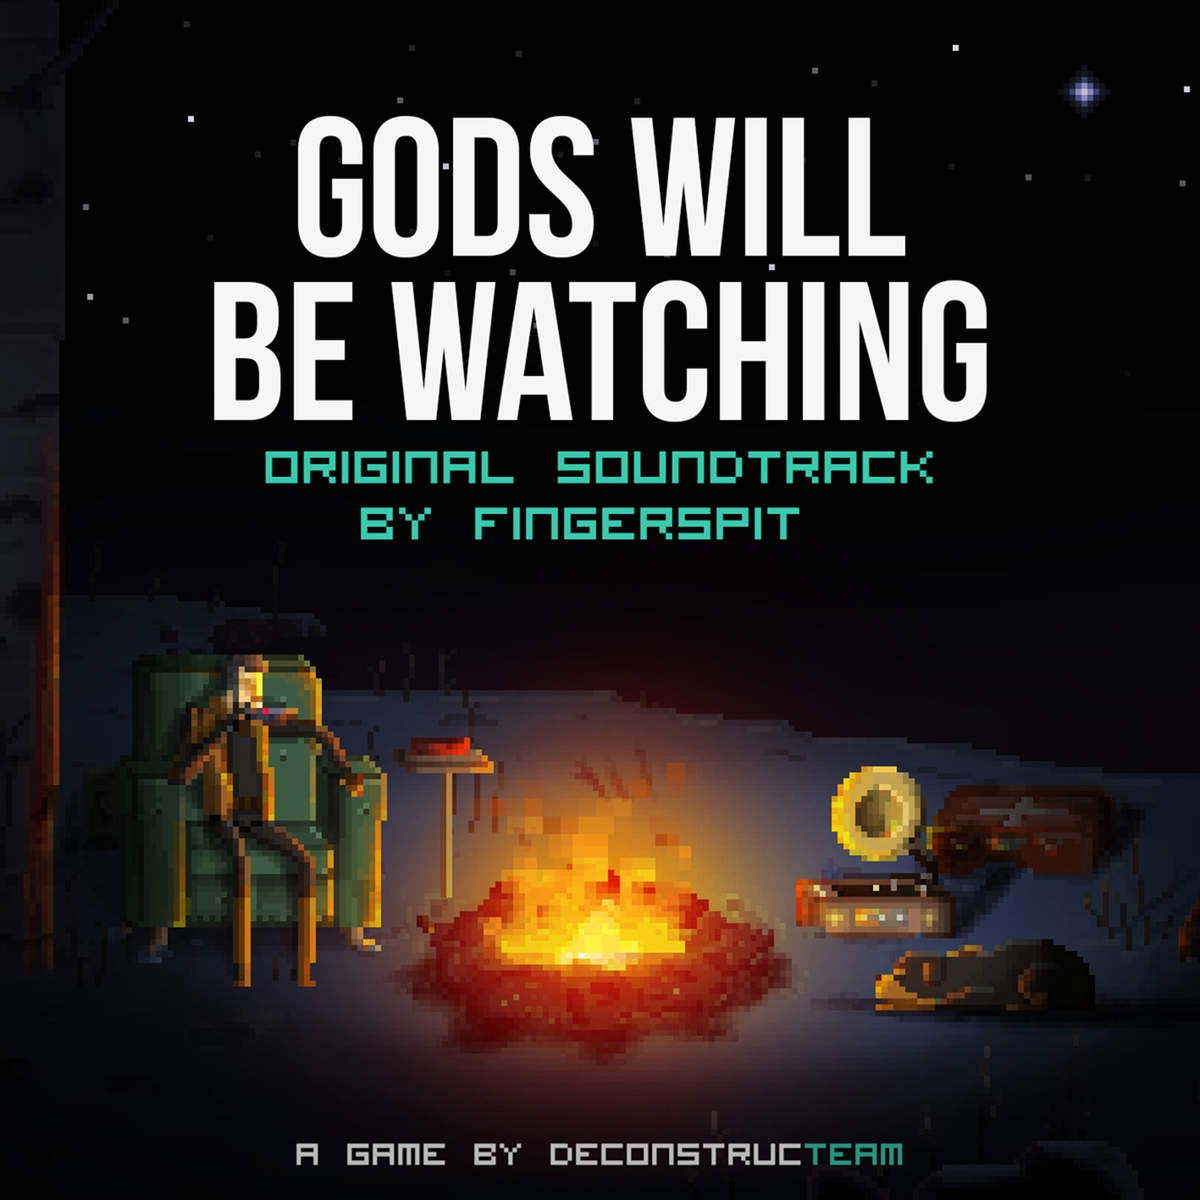 Gods_Will_Be_Watching_Original_Soundtrack__cover1200x1200.jpeg